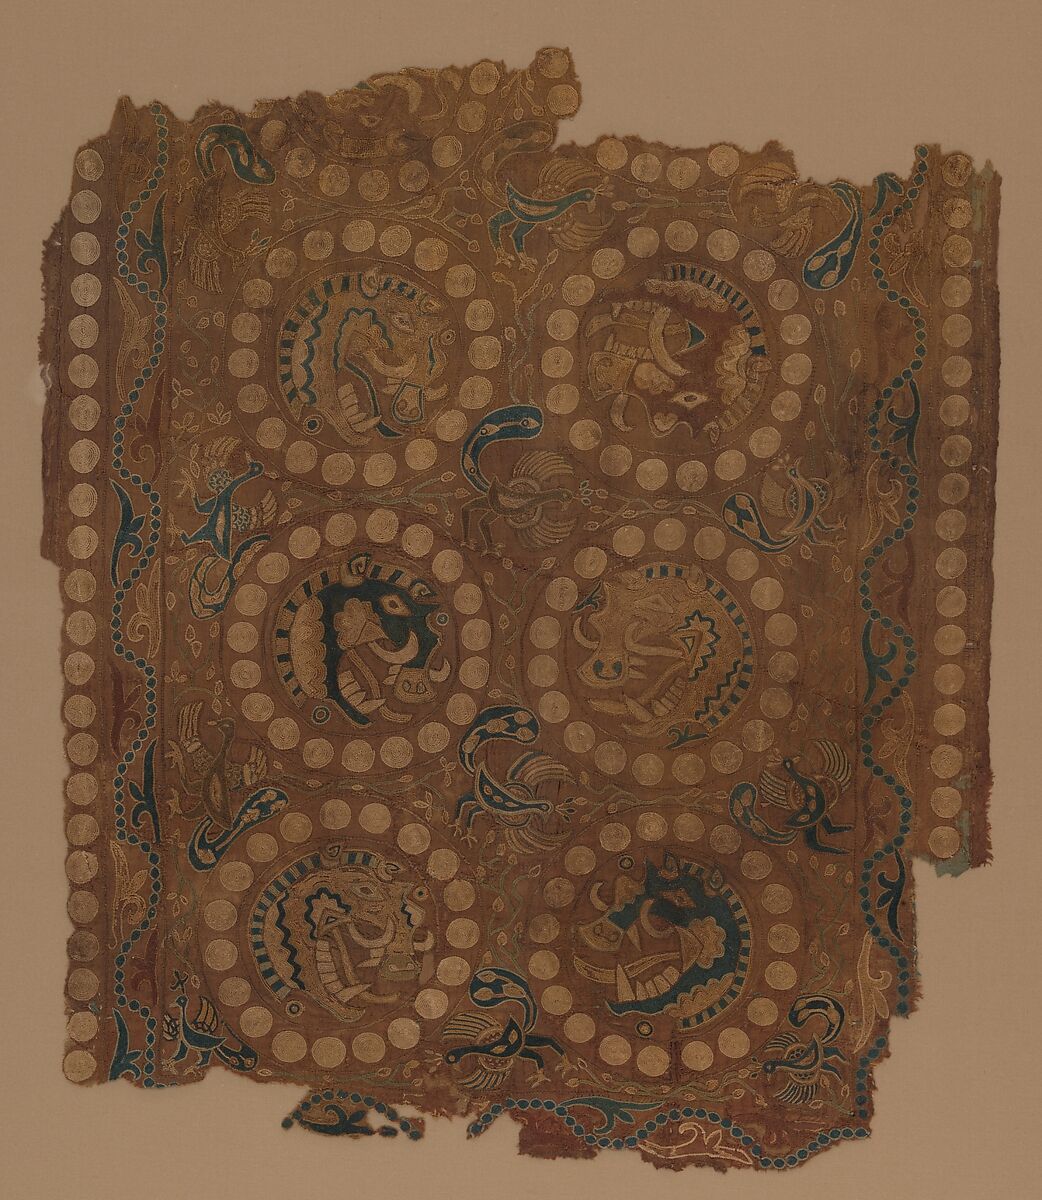 Textile with Boar's Head Roundels, Silk split-stitch embroidery on plain-weave silk, Iran, Afghanistan or China (Xinjiang Autonomous Region) 